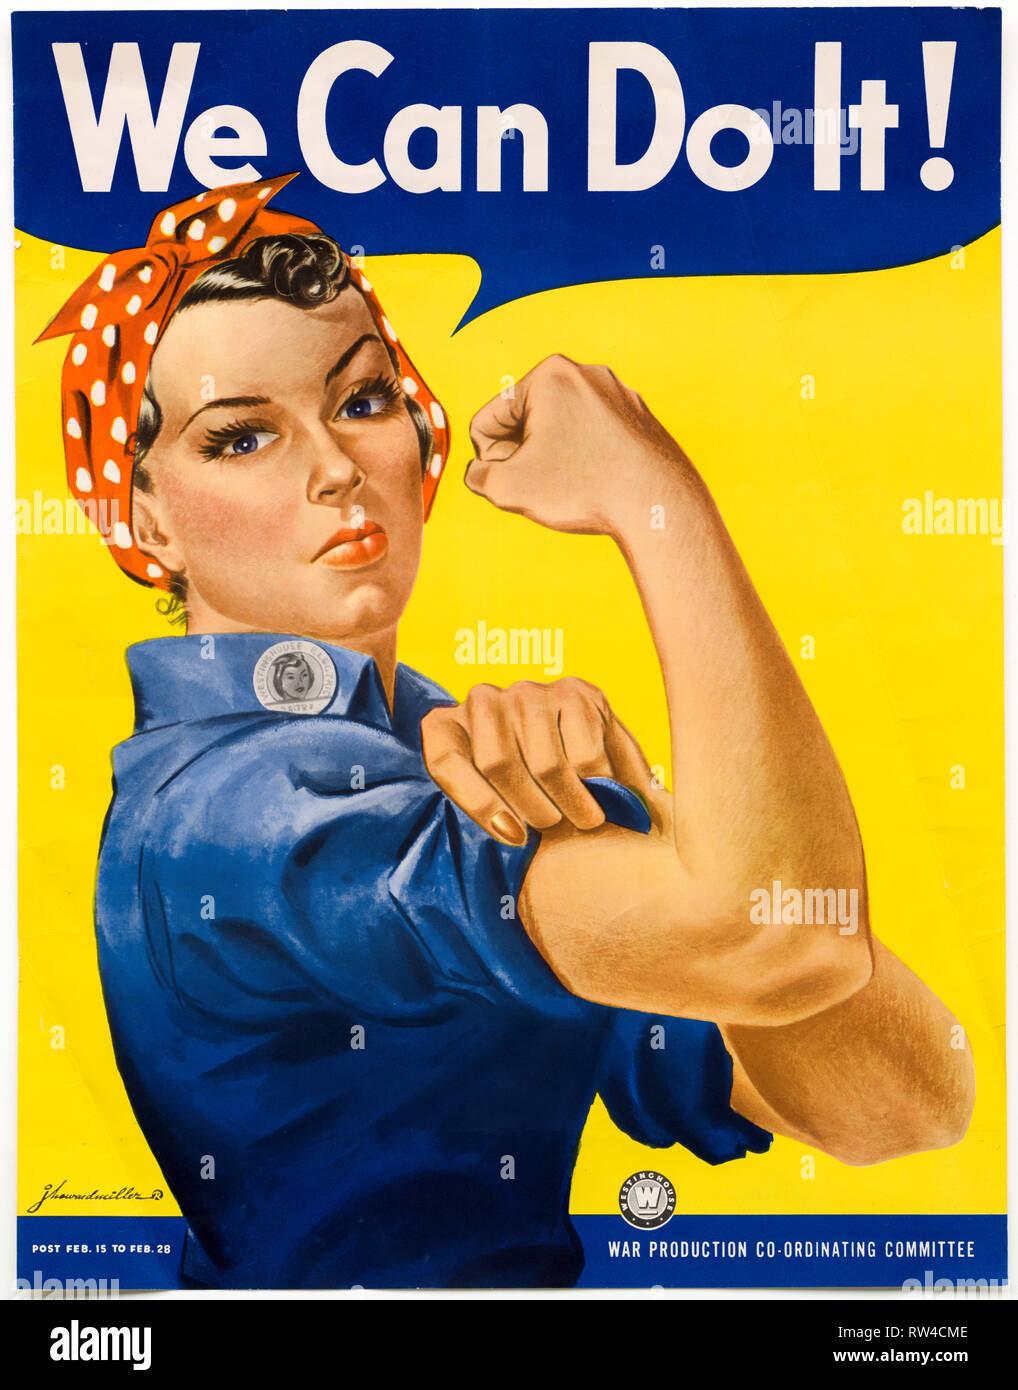 We Can Do It poster, US World War 2, c. 1942- 1943 Stock Photo